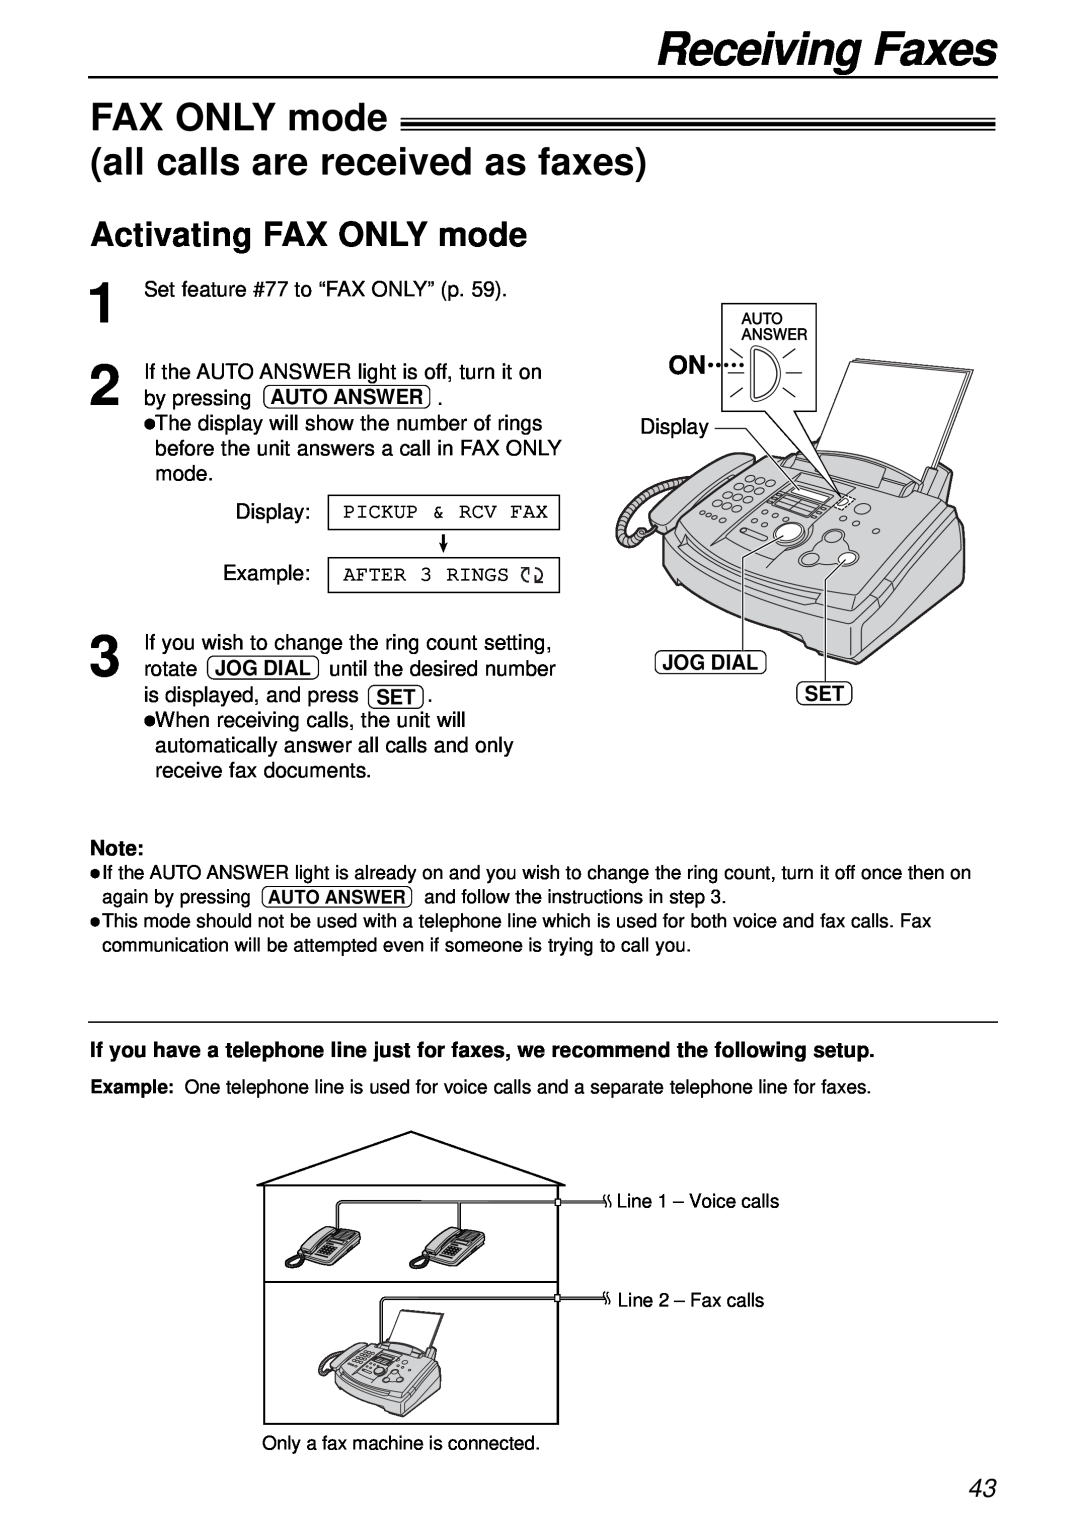 Panasonic KX-FL501 FAX ONLY mode all calls are received as faxes, Activating FAX ONLY mode, Receiving Faxes, Jog Dial 